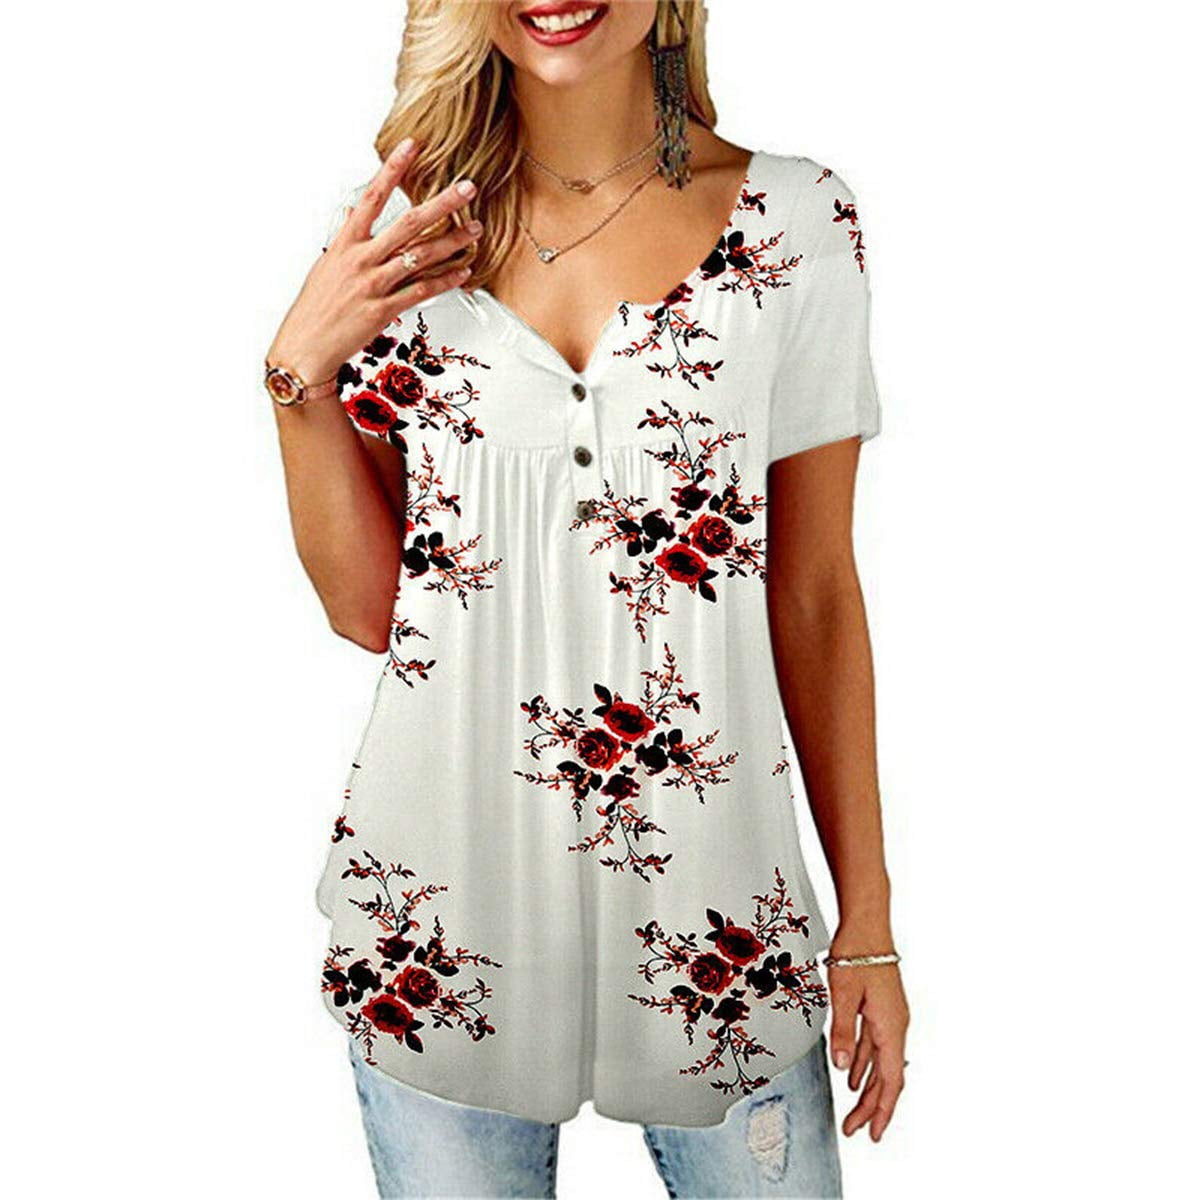 Portazai Shirts for Women Plus Size,Letter Print Tops Blouses Summer Short Sleeve Loose Casual T Shirt Graphic Tees